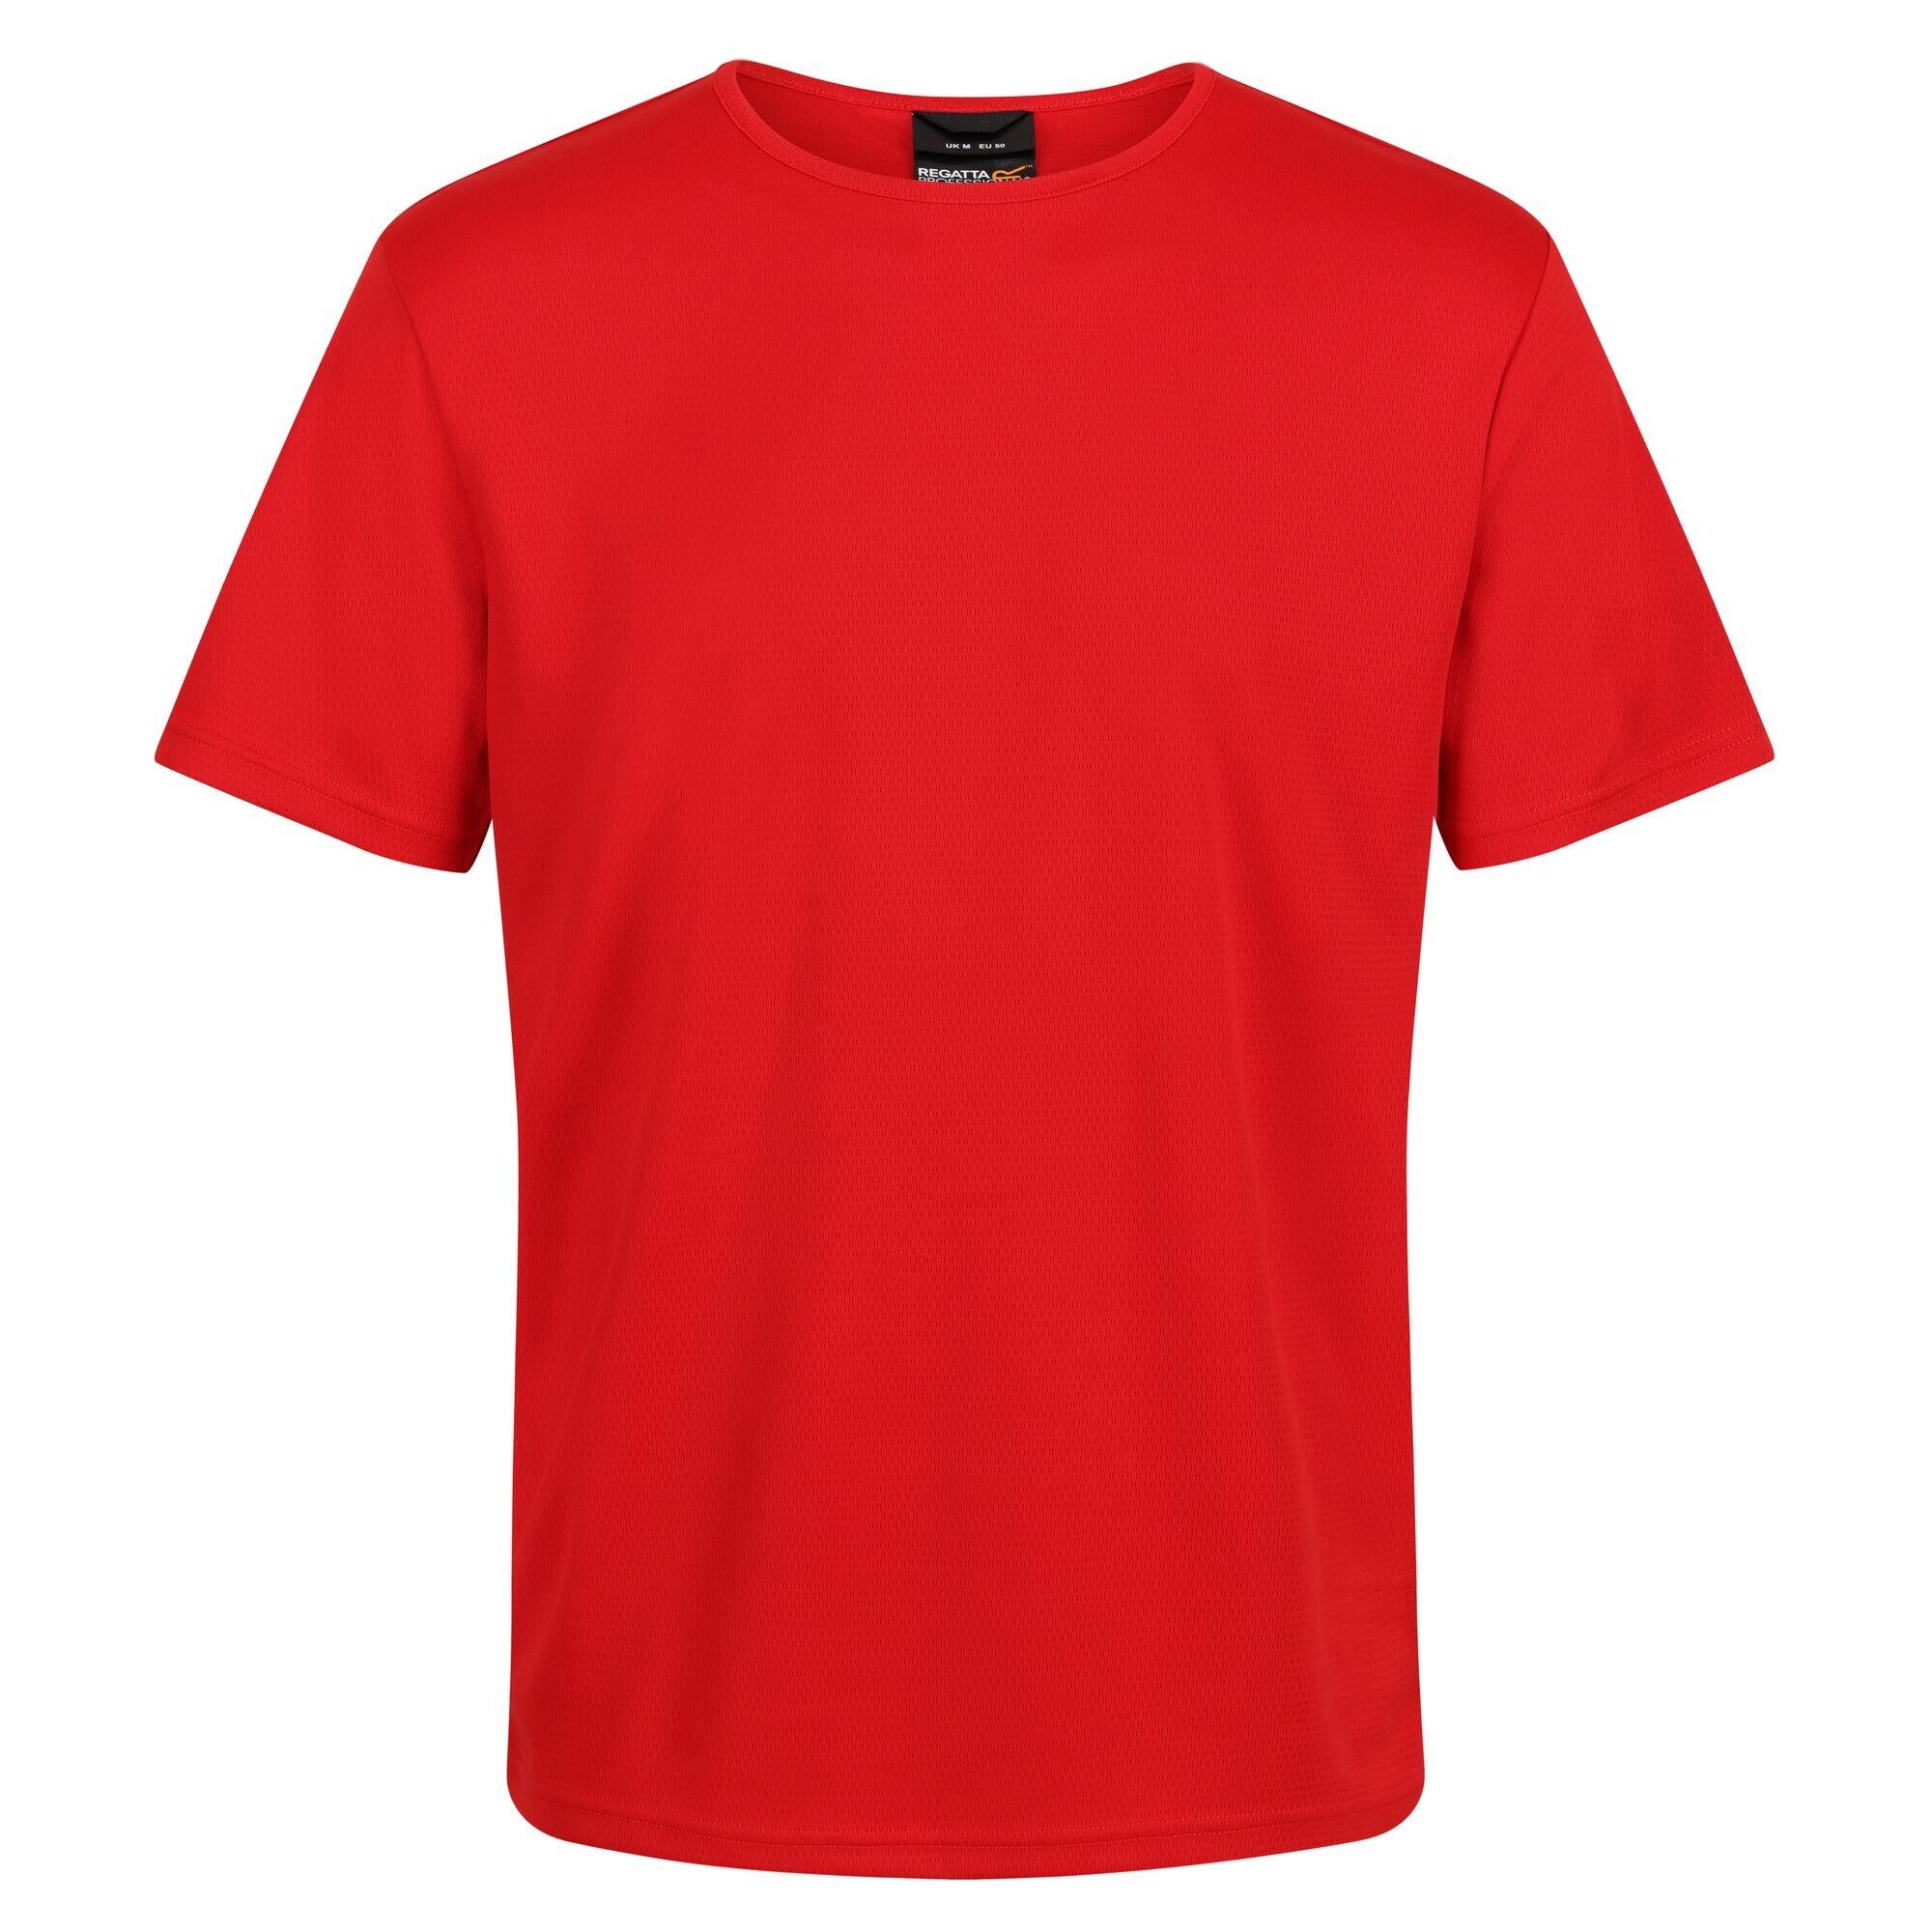 Mens Pro Reflective Moisture Wicking TShirt (Classic Red) 1/5